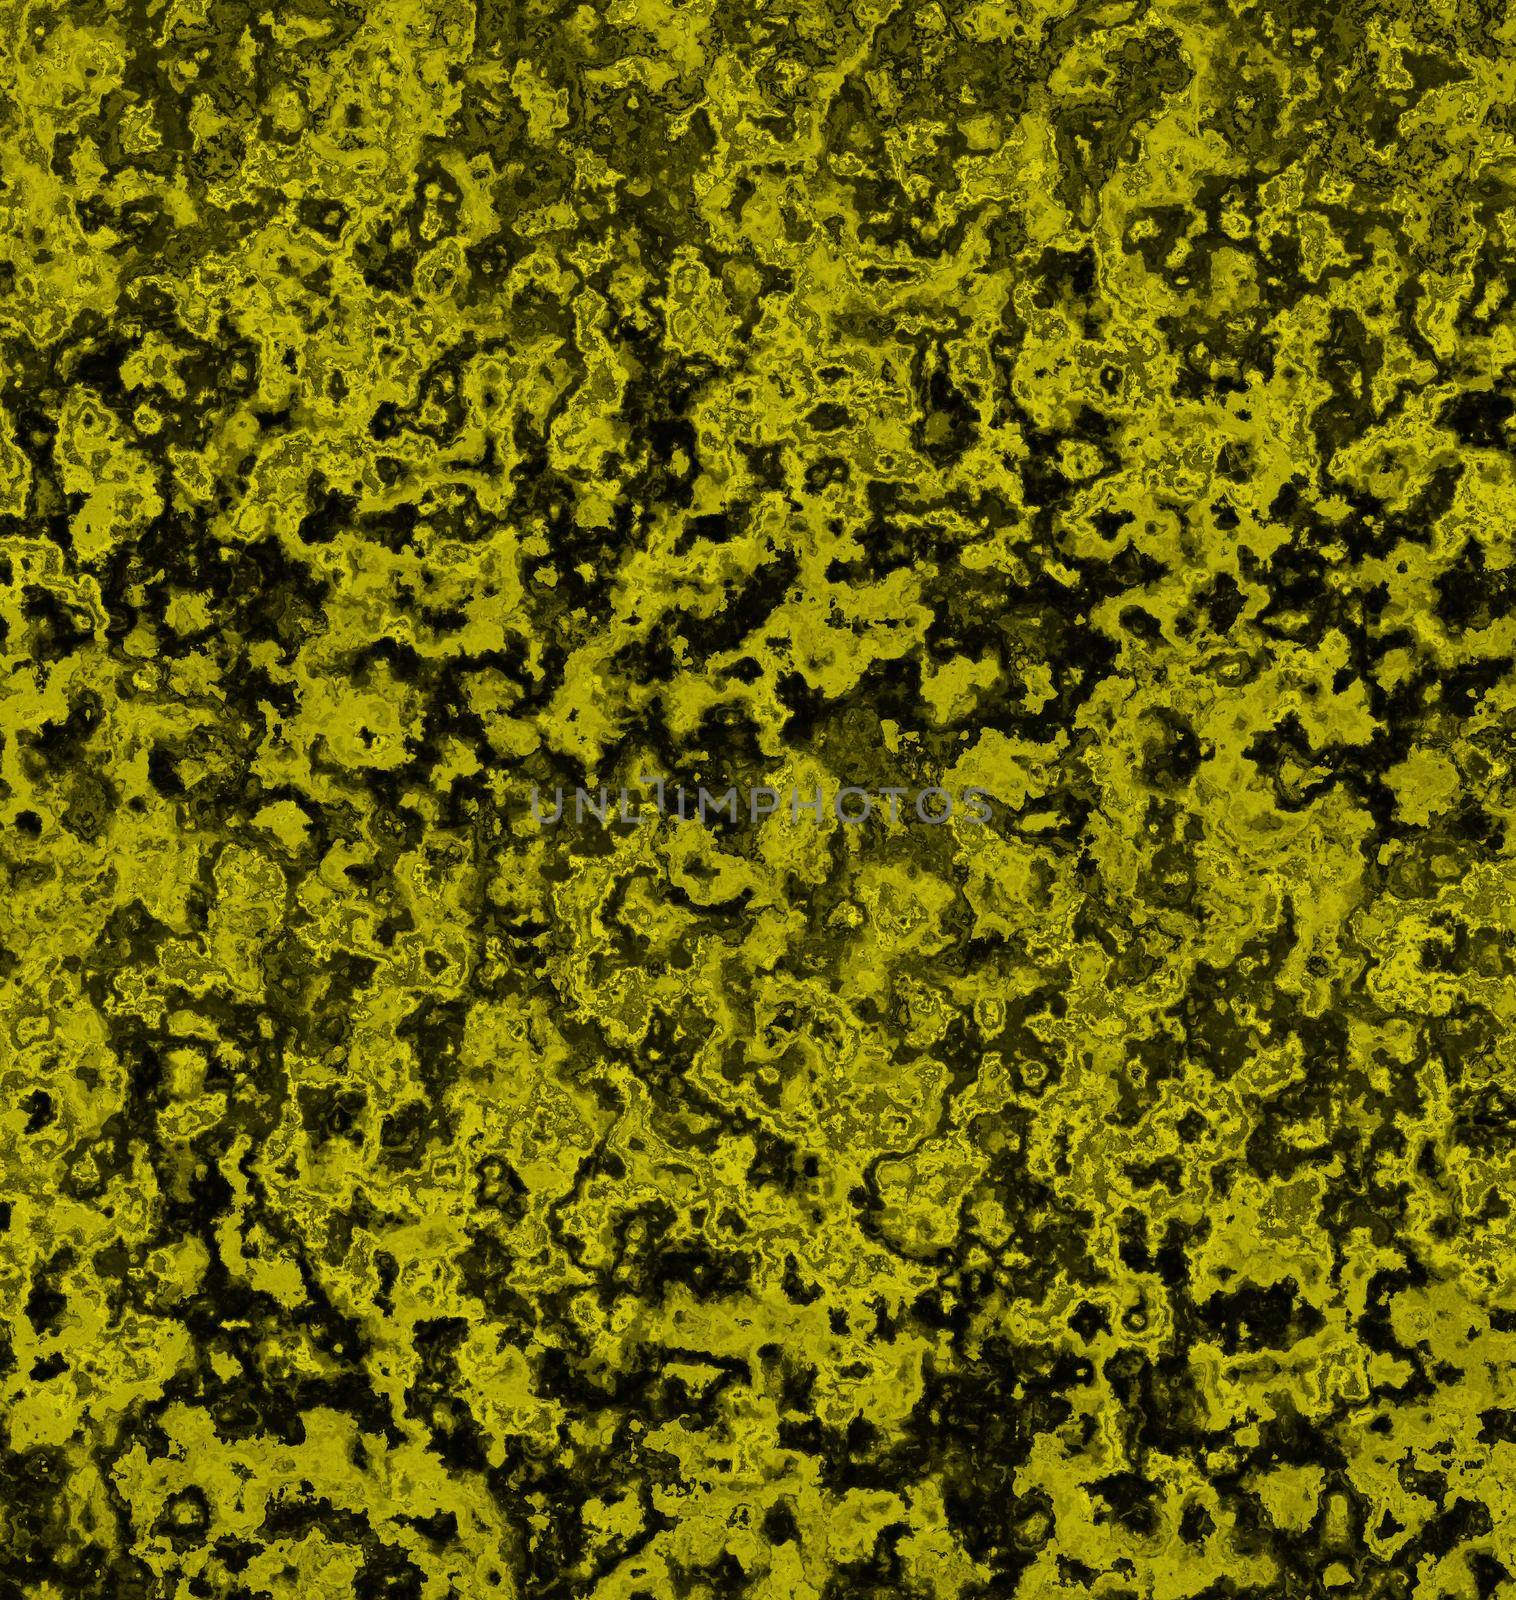 Wavy and haphazard mixing of yellow shades on black canvas. Concept of home decor and interior designing by tabishere